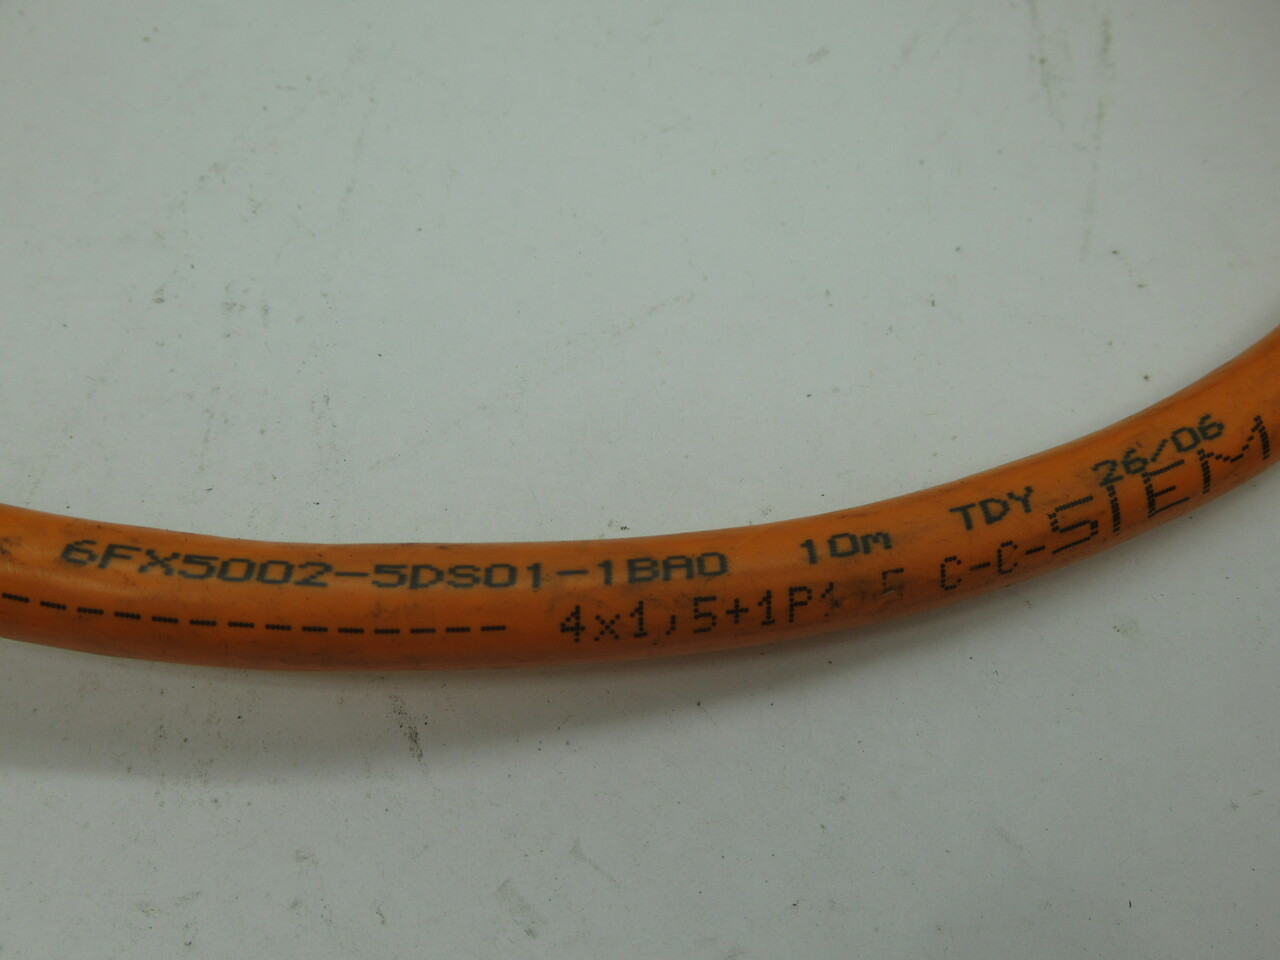 Siemens 6FX5002-5DS01-1BA0 Base Cable For Servo Drive 1000V @ 80C 500mA CUT USED